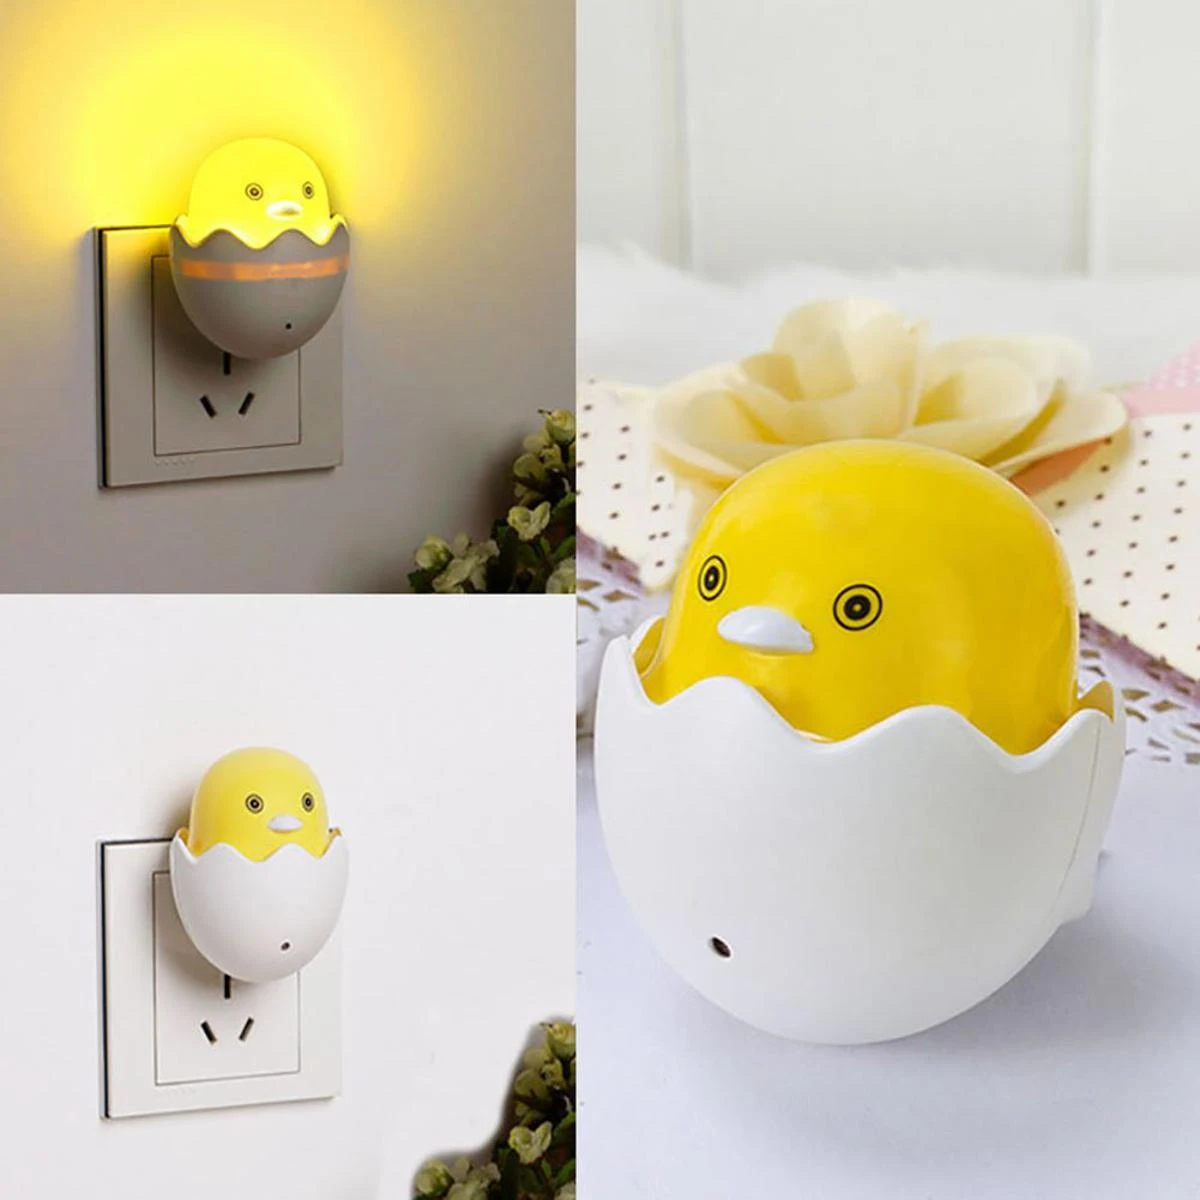 Yellow duck with egg shape led night light with Mushroom